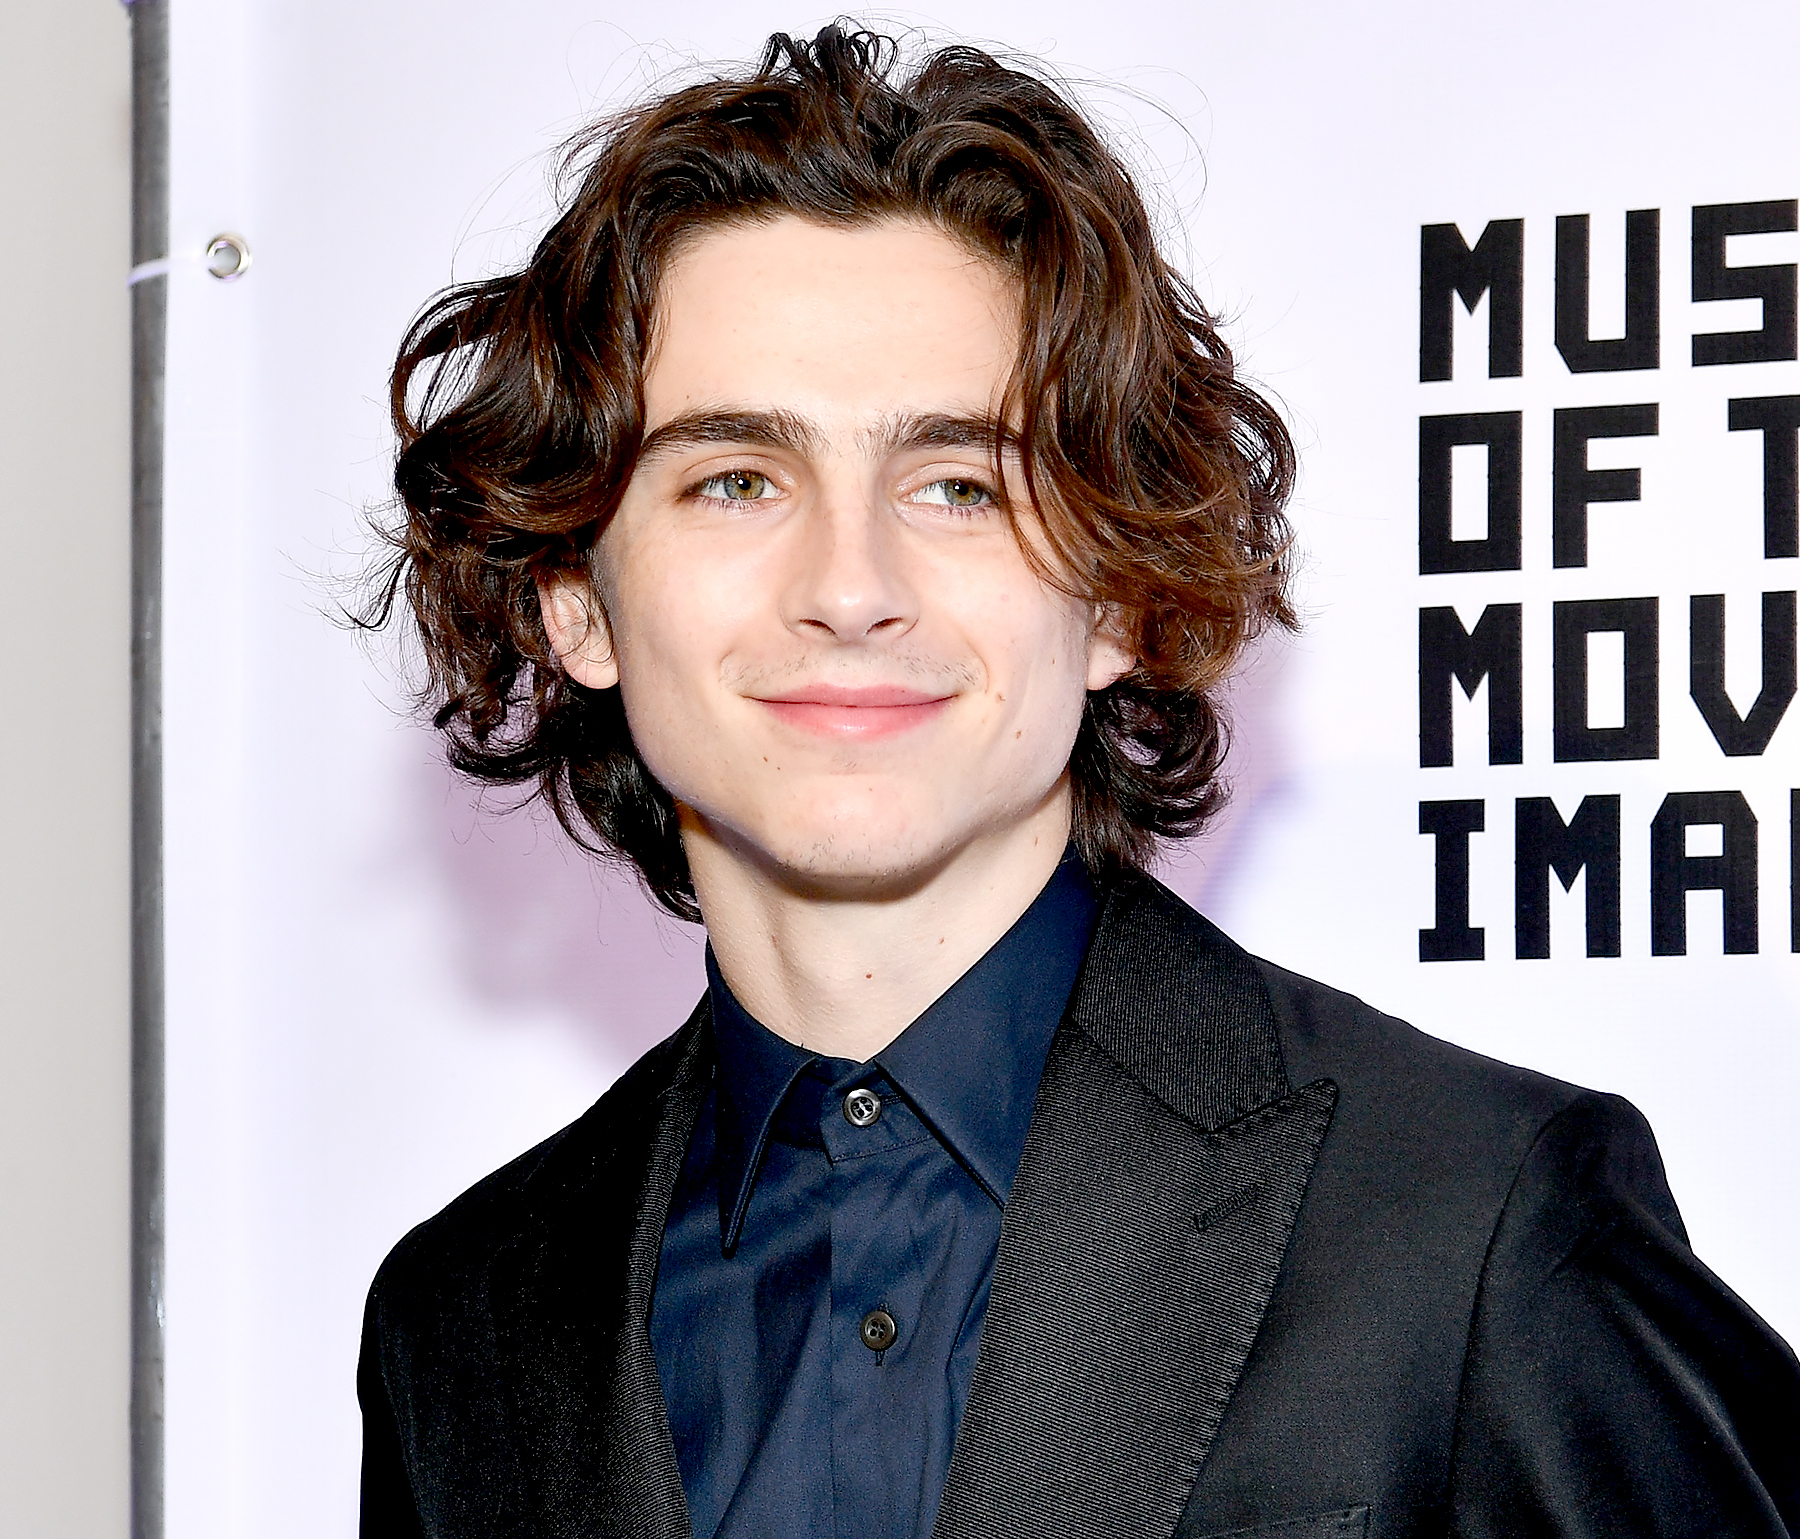 Who Is Timothee Chalamet? 5 Things to Know About the Actor Us Weekly